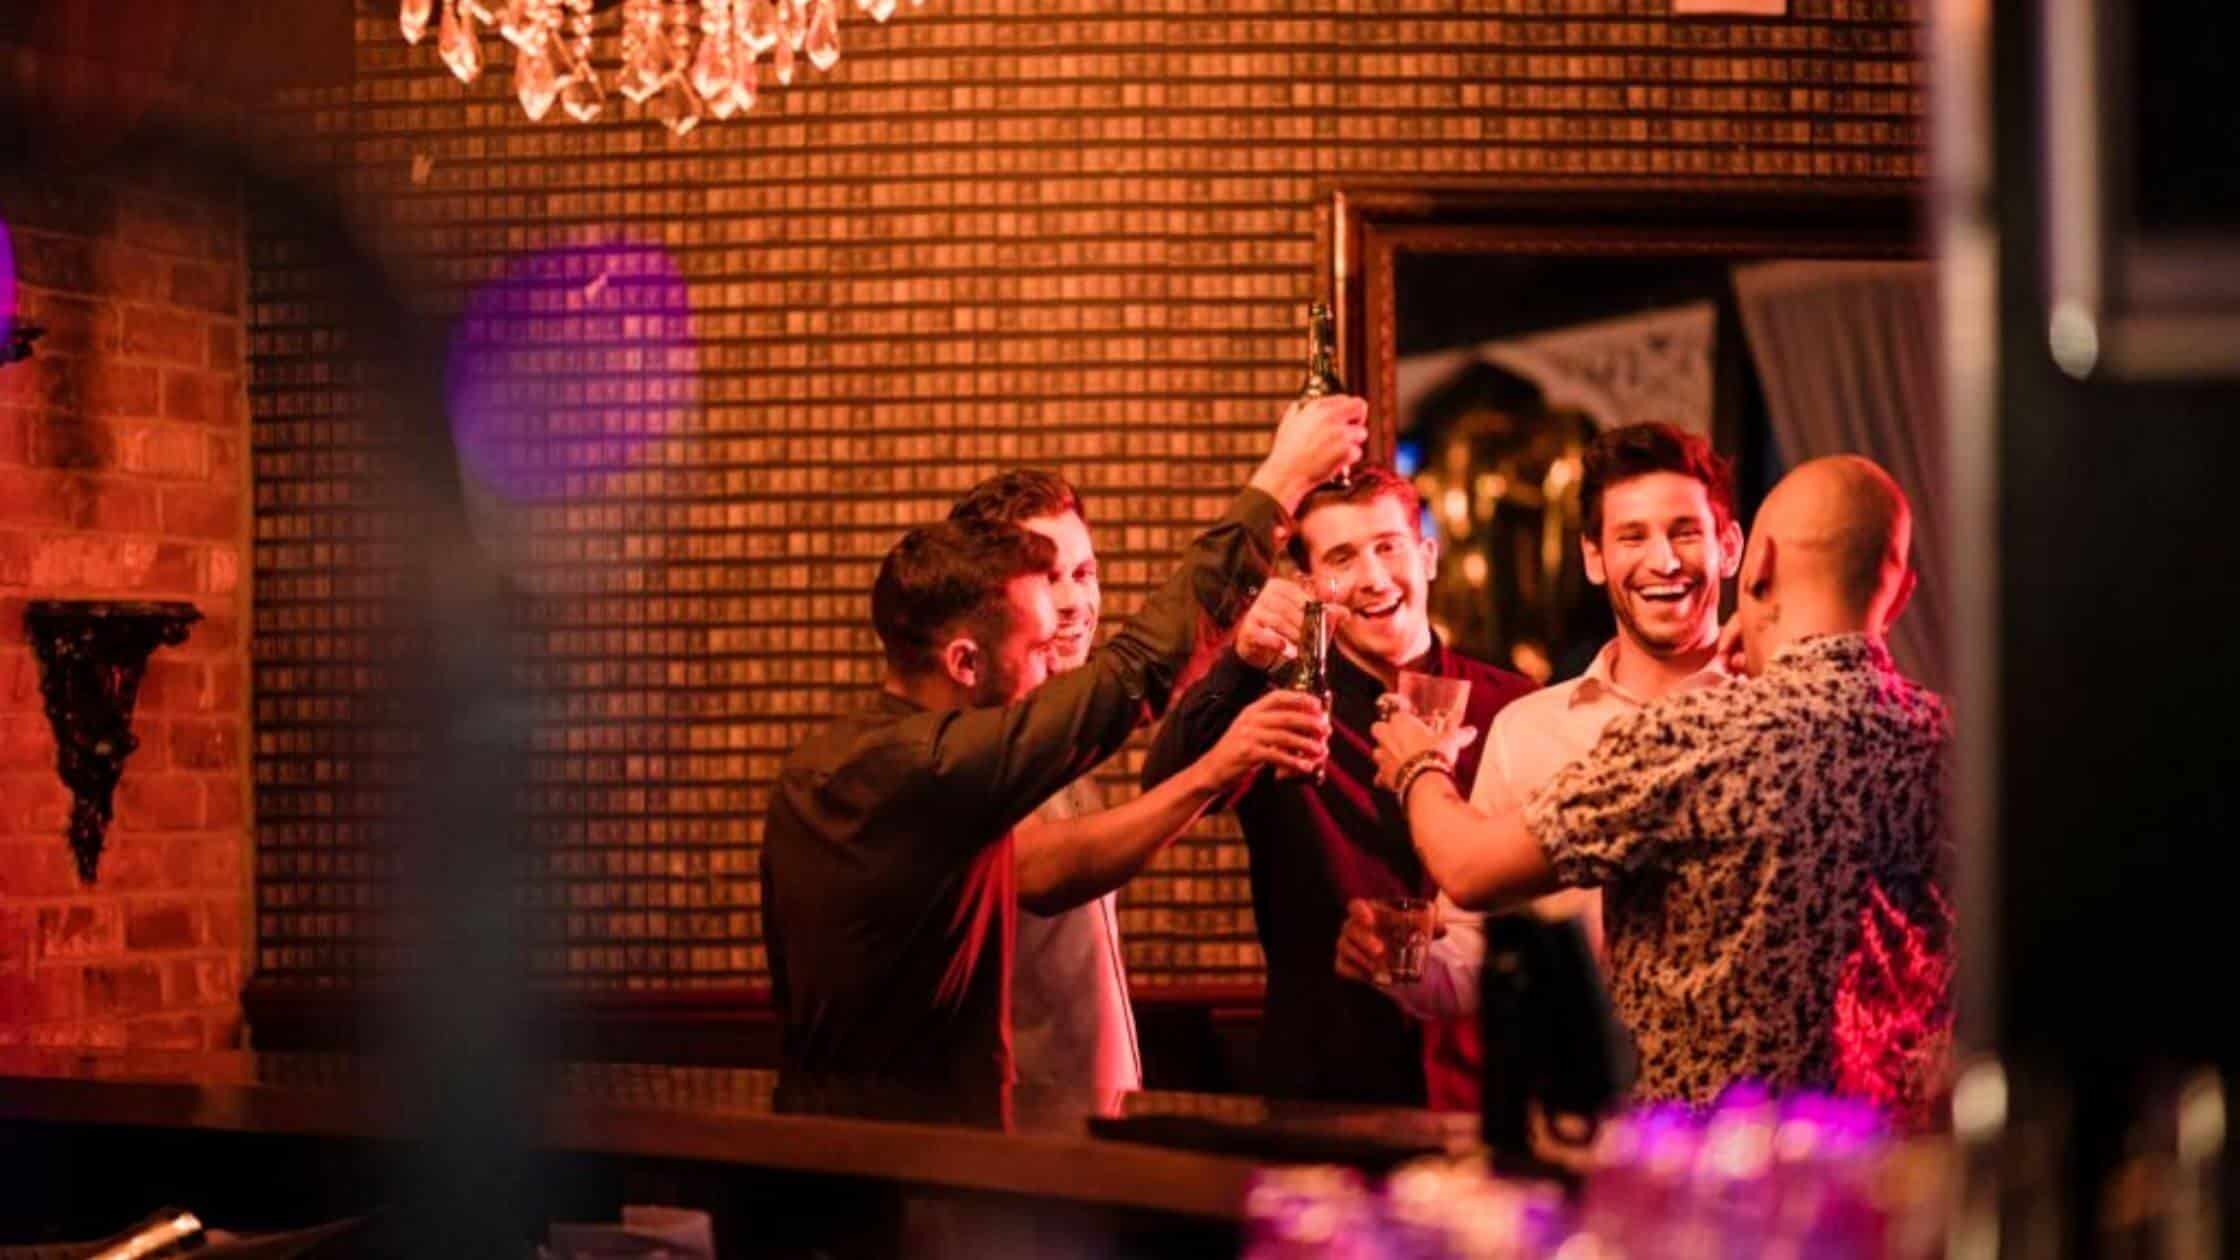 The Best 10 Gay Bars In Chicago